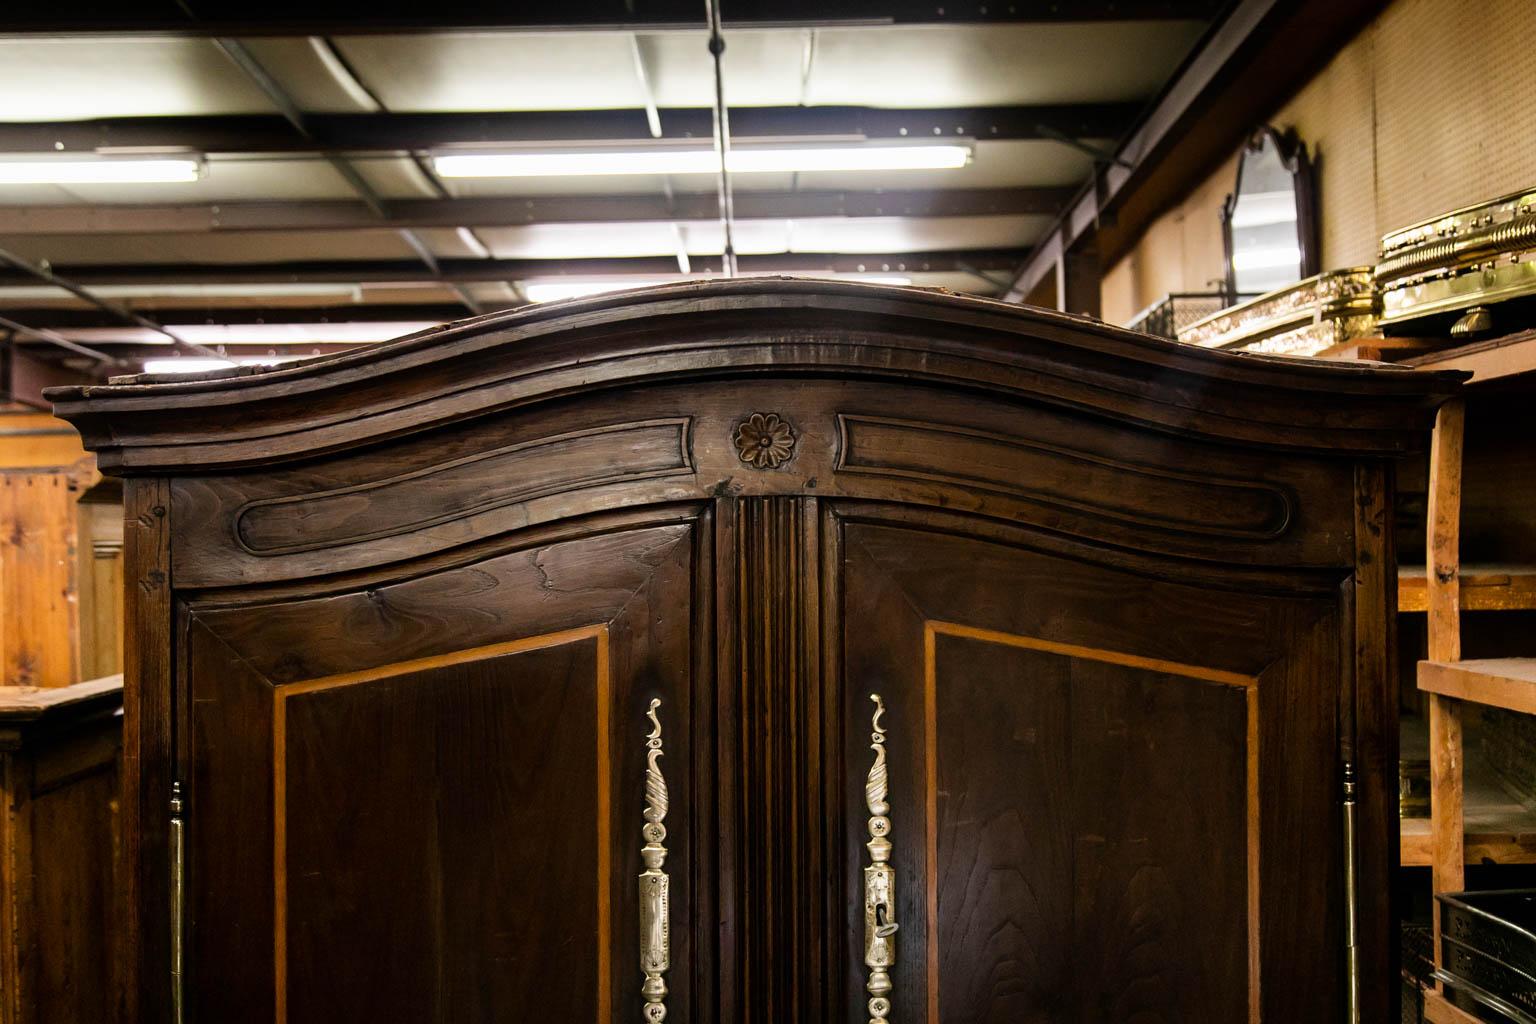 The frieze of the armoire has serpentine carved panels. The doors are inlaid with satinwood. The center panel has three carved shaped moldings. The lower apron has a carved stylized scallop shell in the center. The interior is open but has three